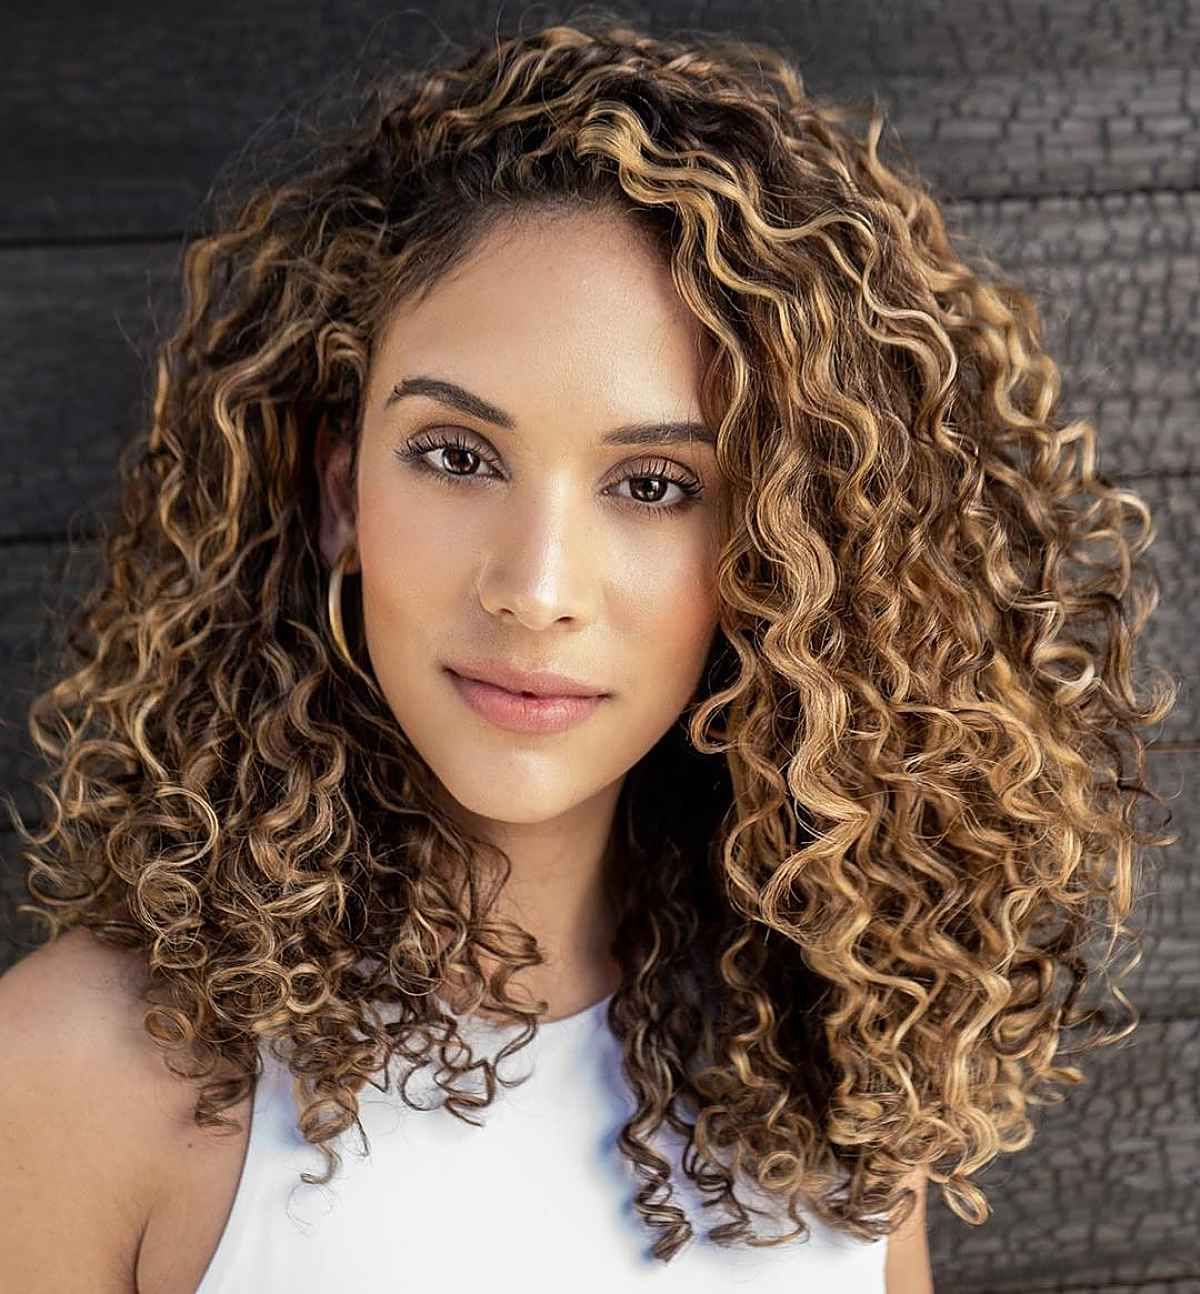 62 Best Shoulder Length Curly Hair Cuts & Styles In 2022 Throughout Recent Layered Curly Medium Length Hairstyles (View 7 of 25)